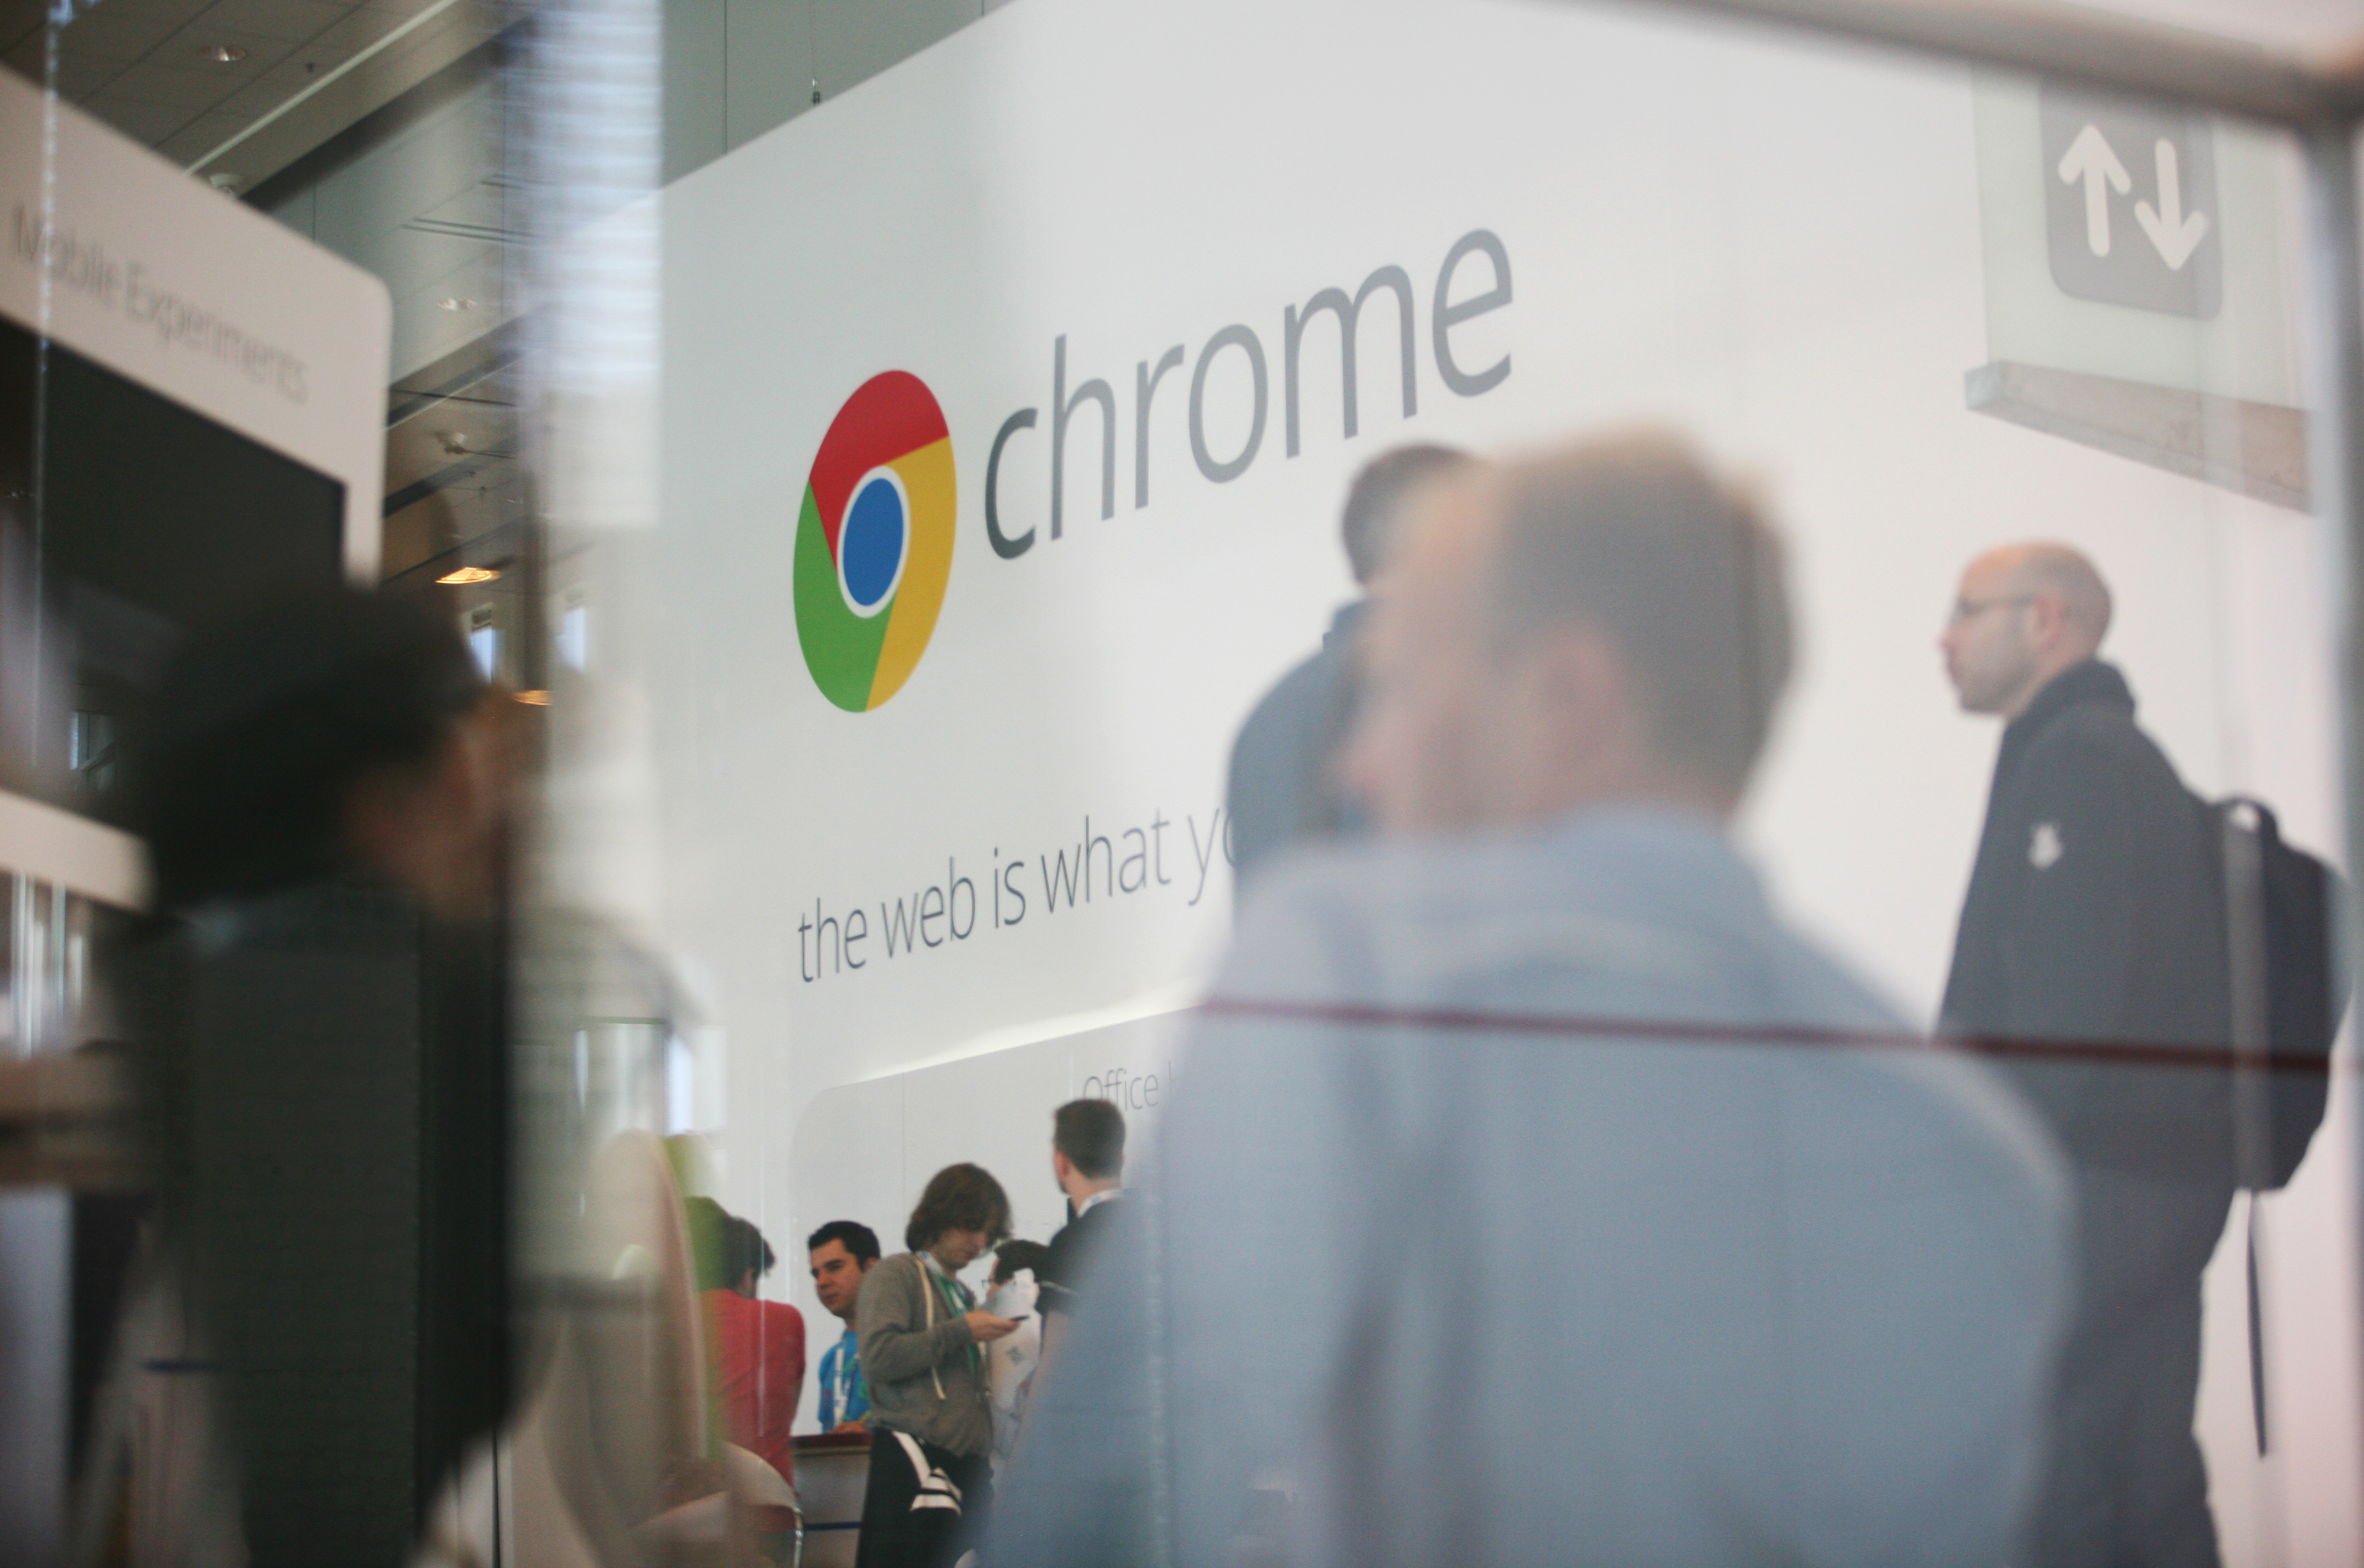 Google Chrome's logo is seen at Google's annual developer conference, Google I/O, at Moscone Center in San Francisco on June 28, 2012 in California.   AFP PHOTO / Kimihiro Hoshino / AFP PHOTO / KIMIHIRO HOSHINO